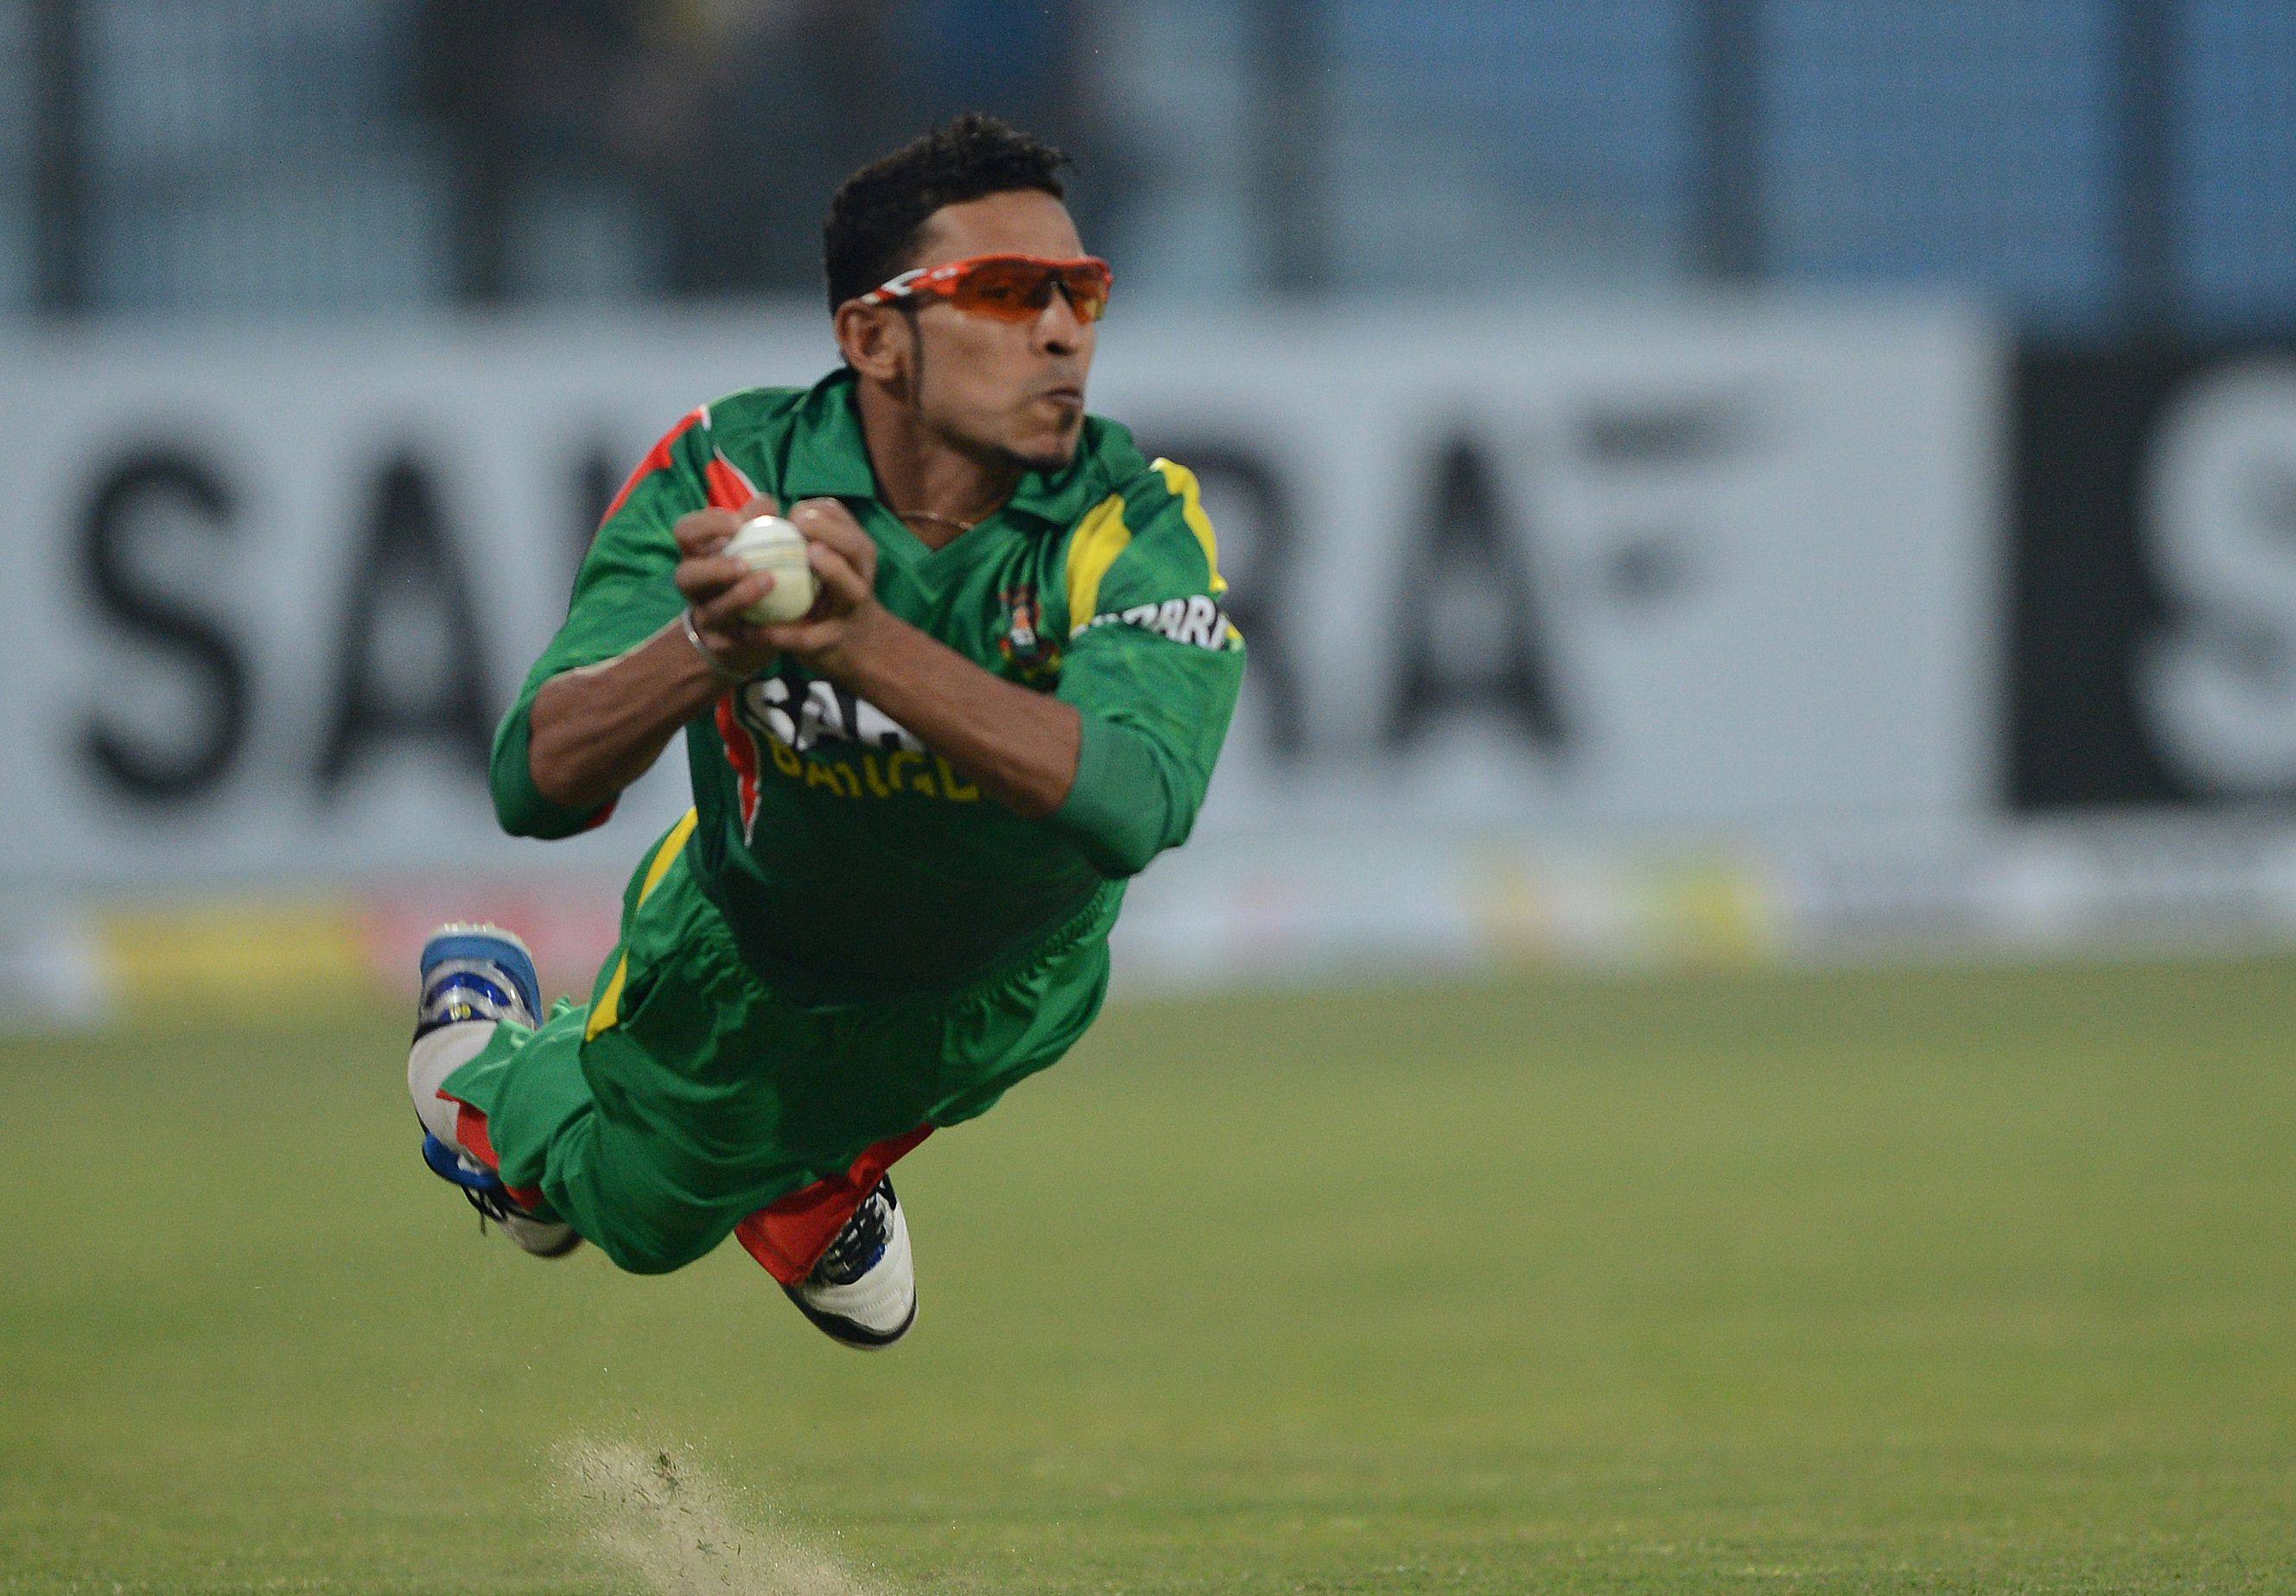 Bangladesh cricketer Nasir Hossain was among those charged and banned as part of the investigation. Photo: AFP